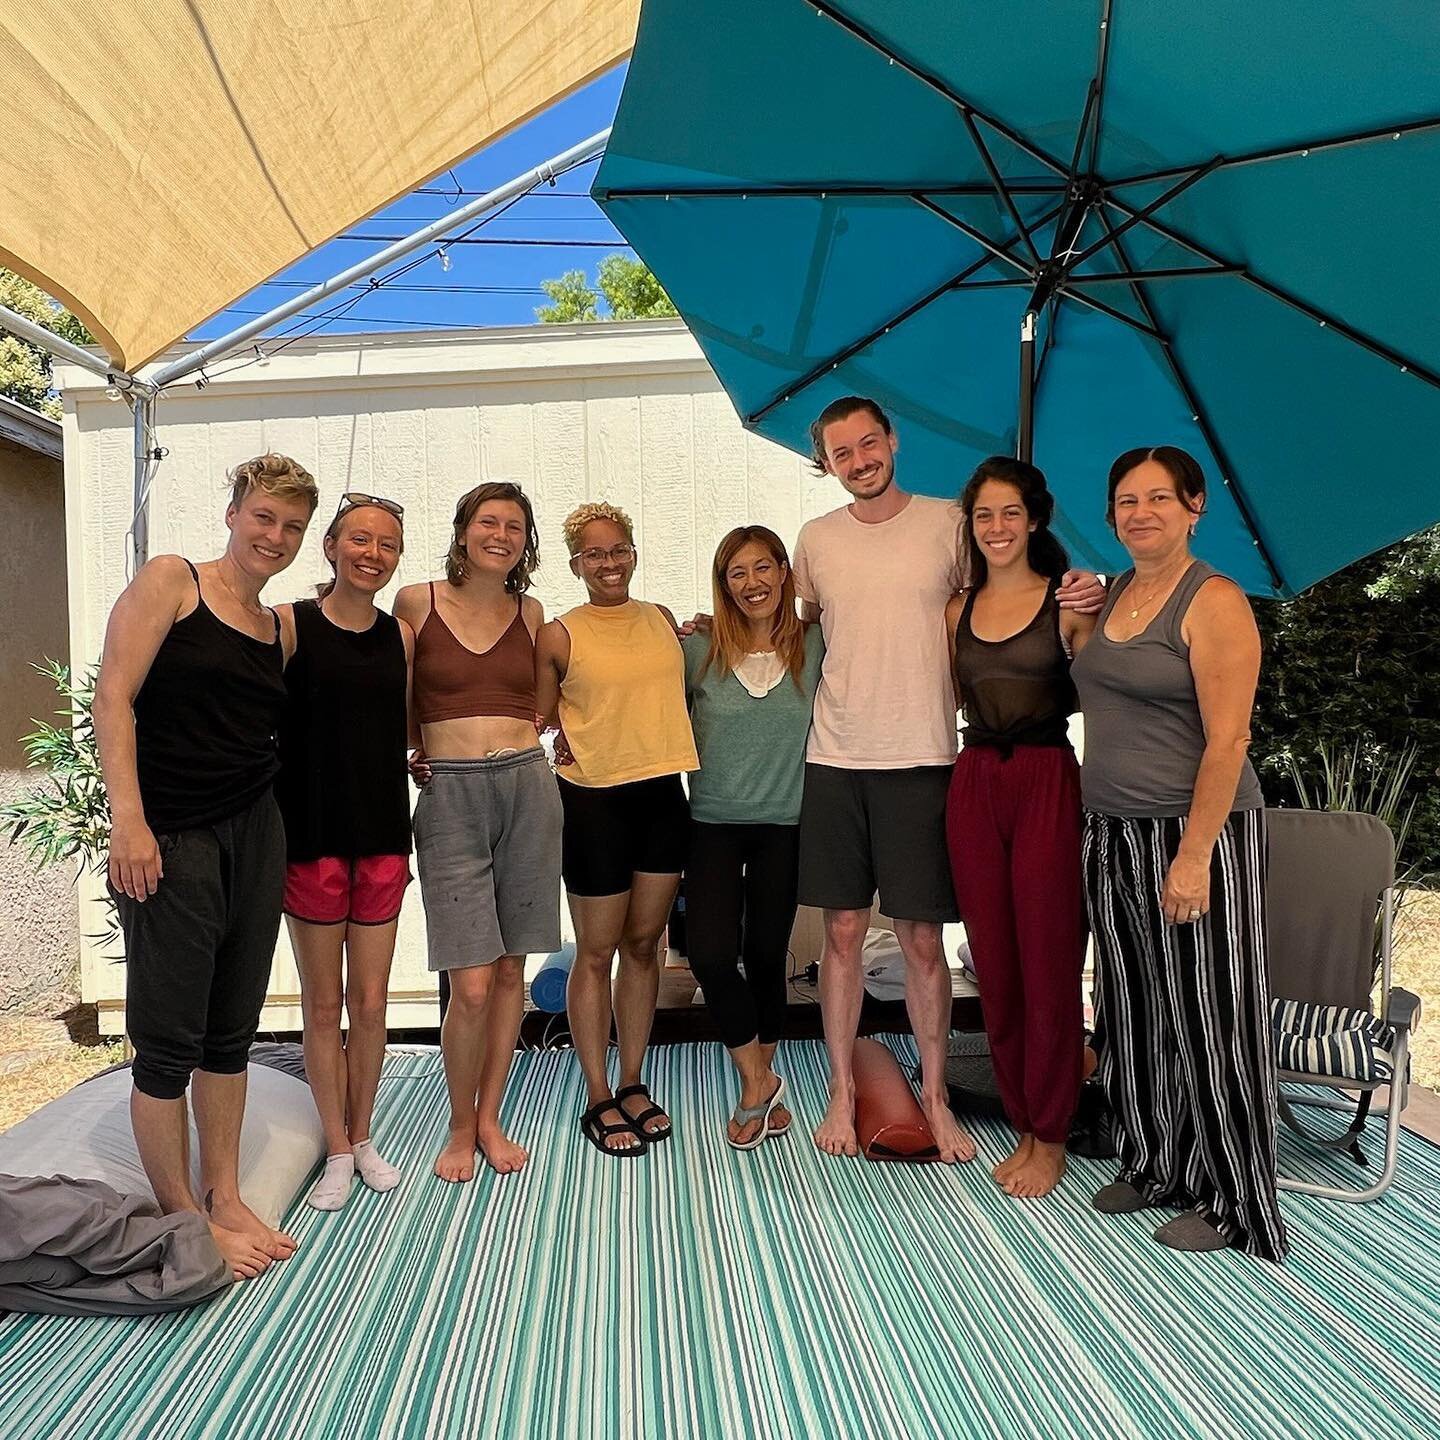 Yesterday, the Responsive Body eco-family completed a week-long intensive of discussion, somatic explorations, partnering, body-to-body work, social engagement, laughing, crying, sharing, offering, and so much more&hellip; 

Here are some descriptors